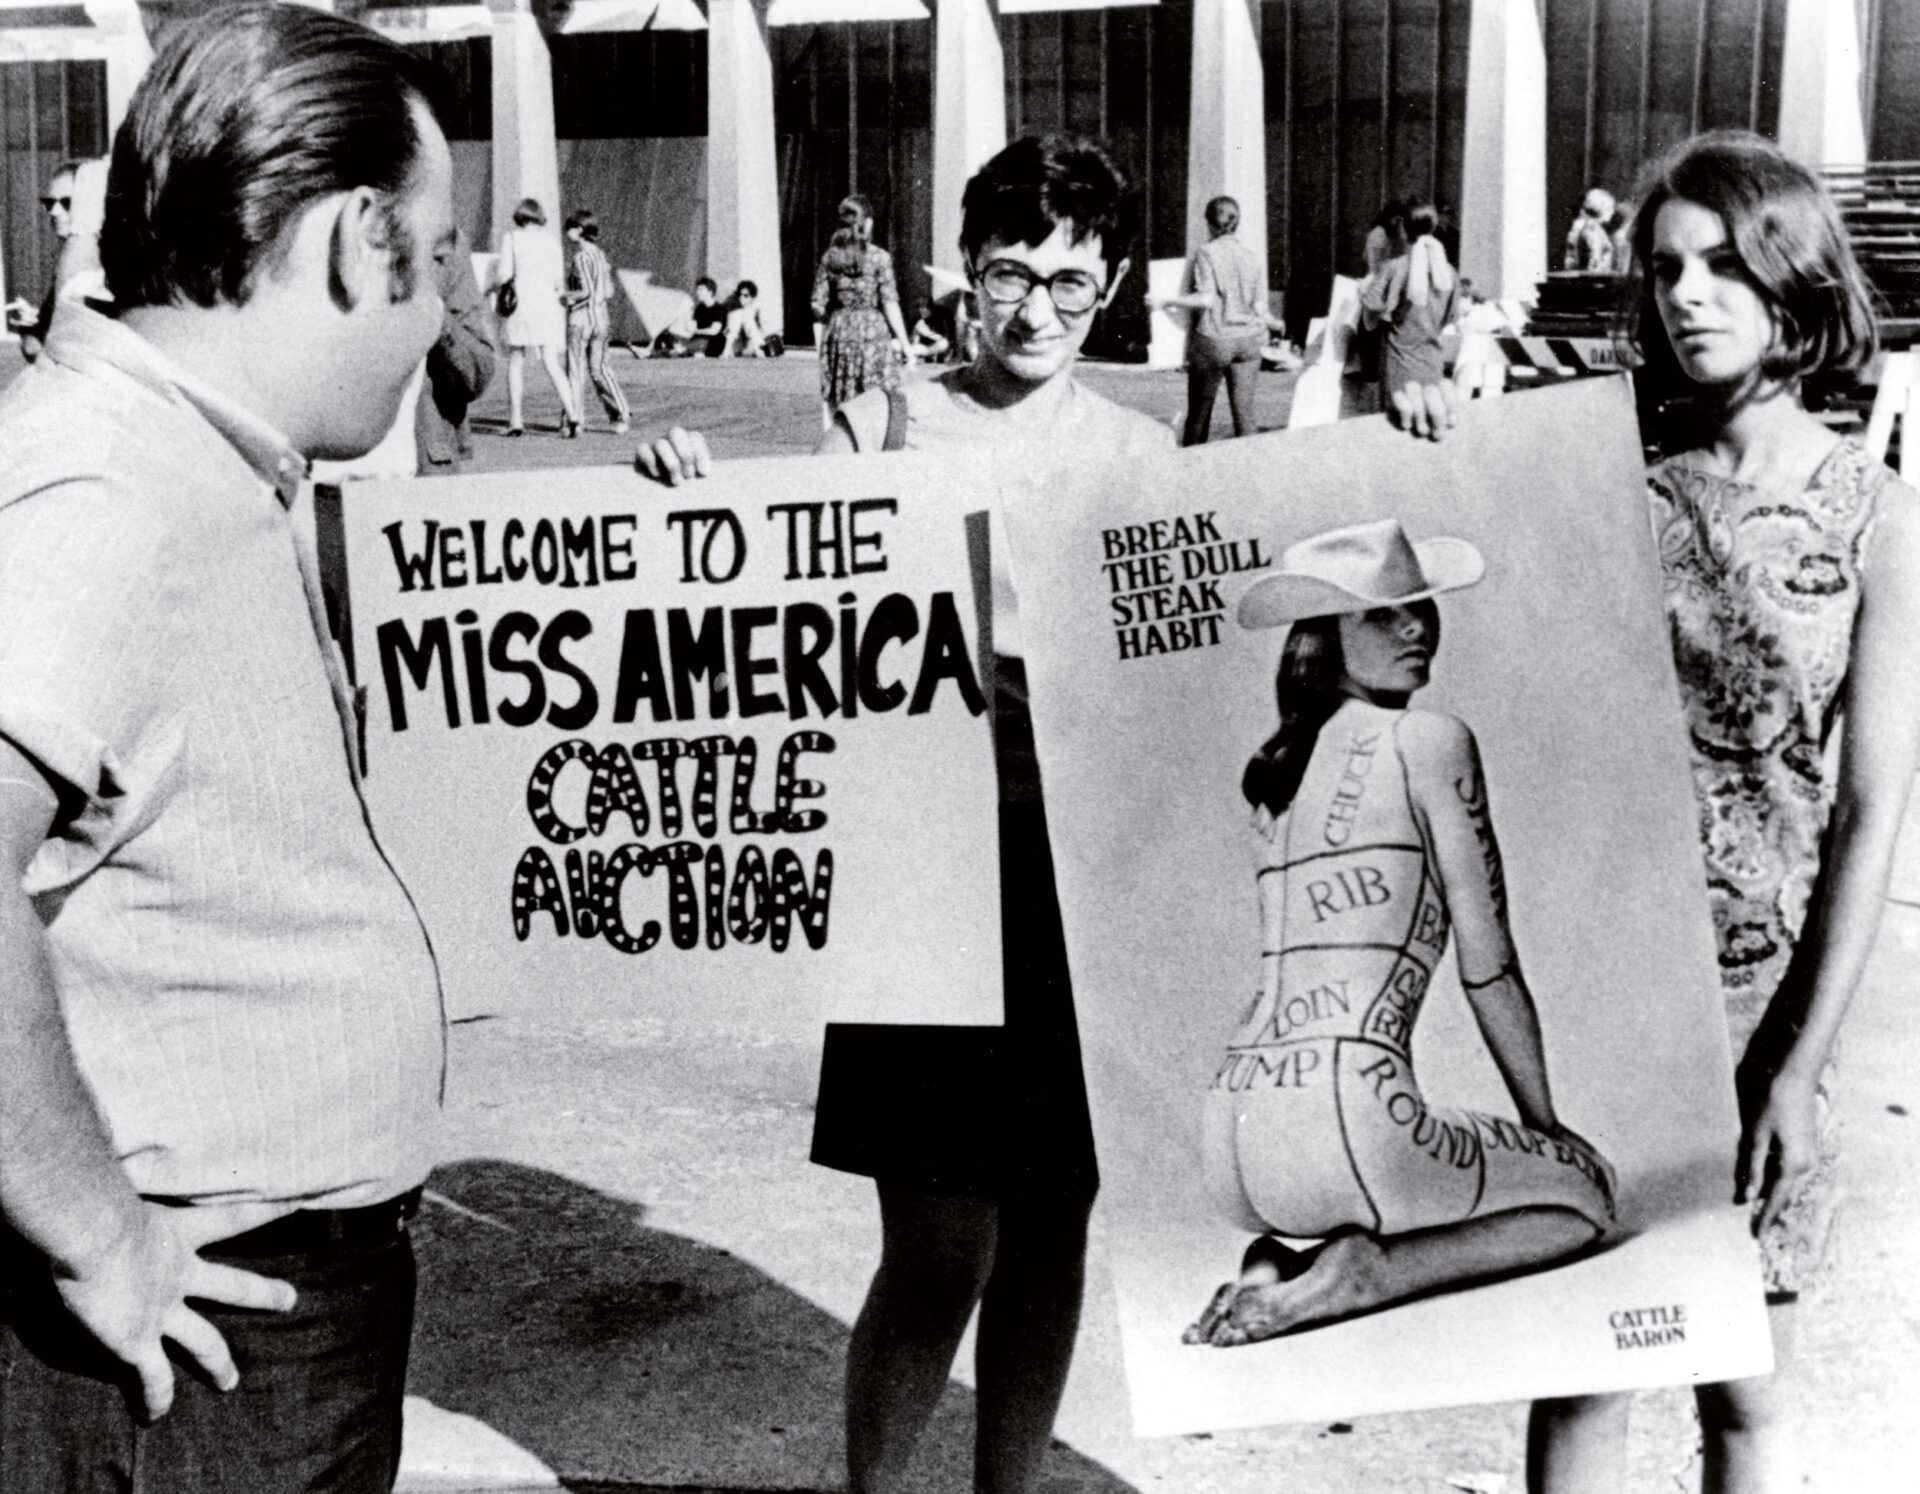 MISS AMERICA PAGEANT PROTEST